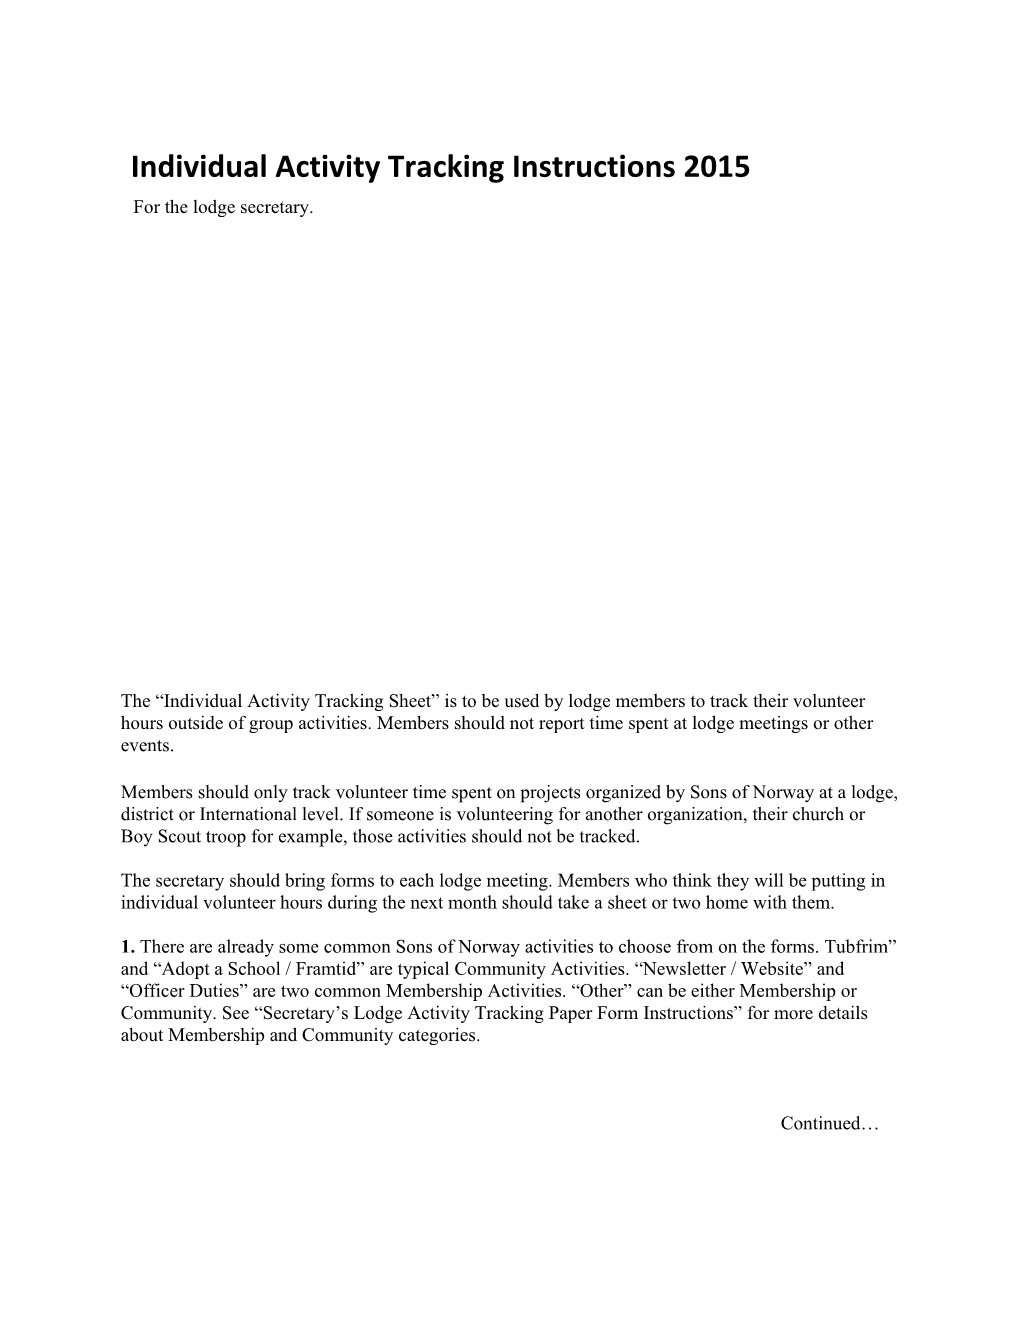 Individual Activity Tracking Instructions 2015